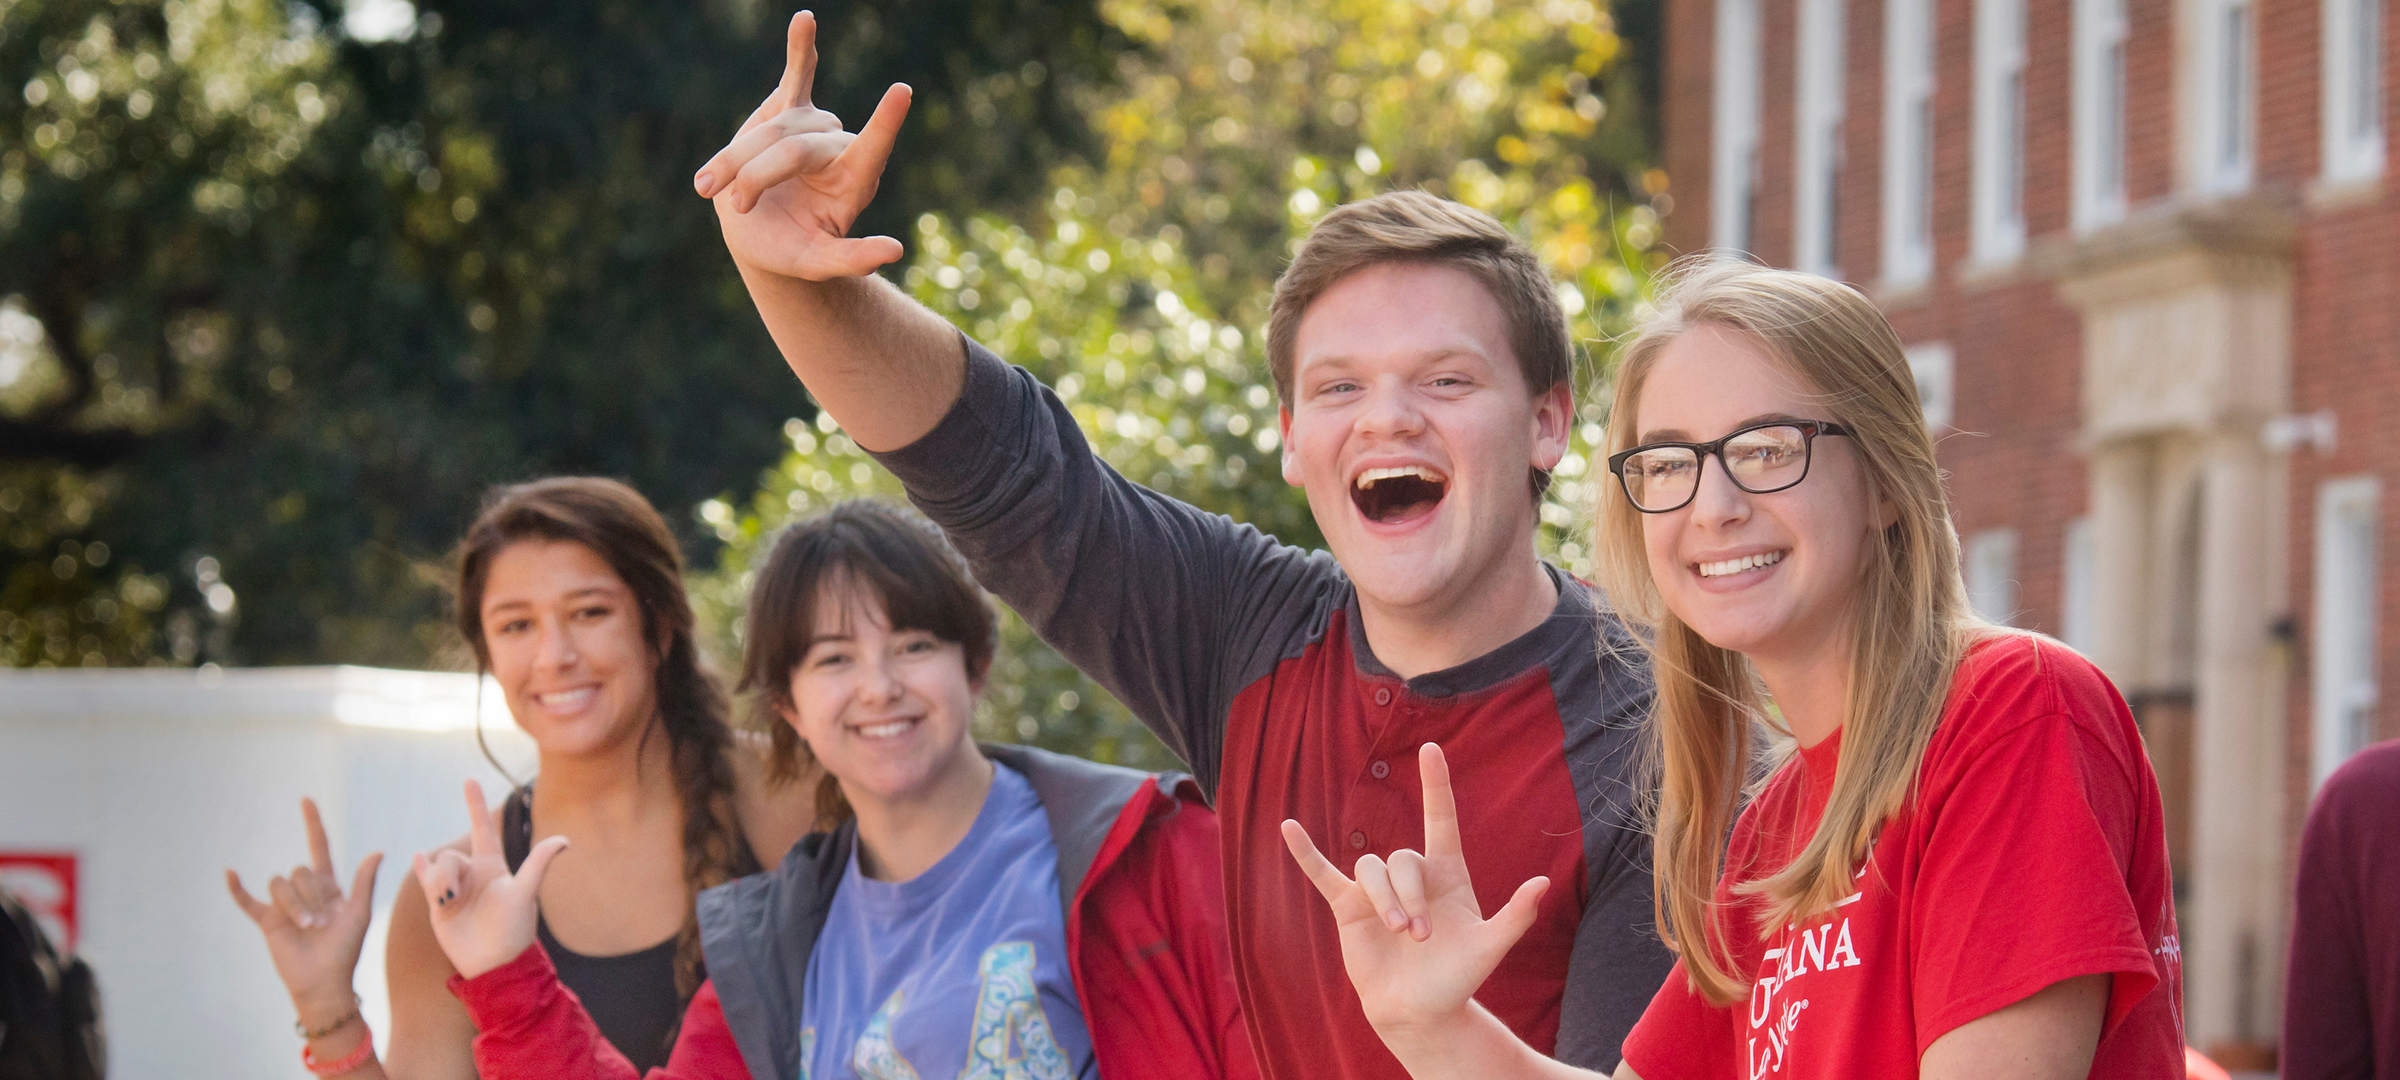 students smiling and making the UL hand sign